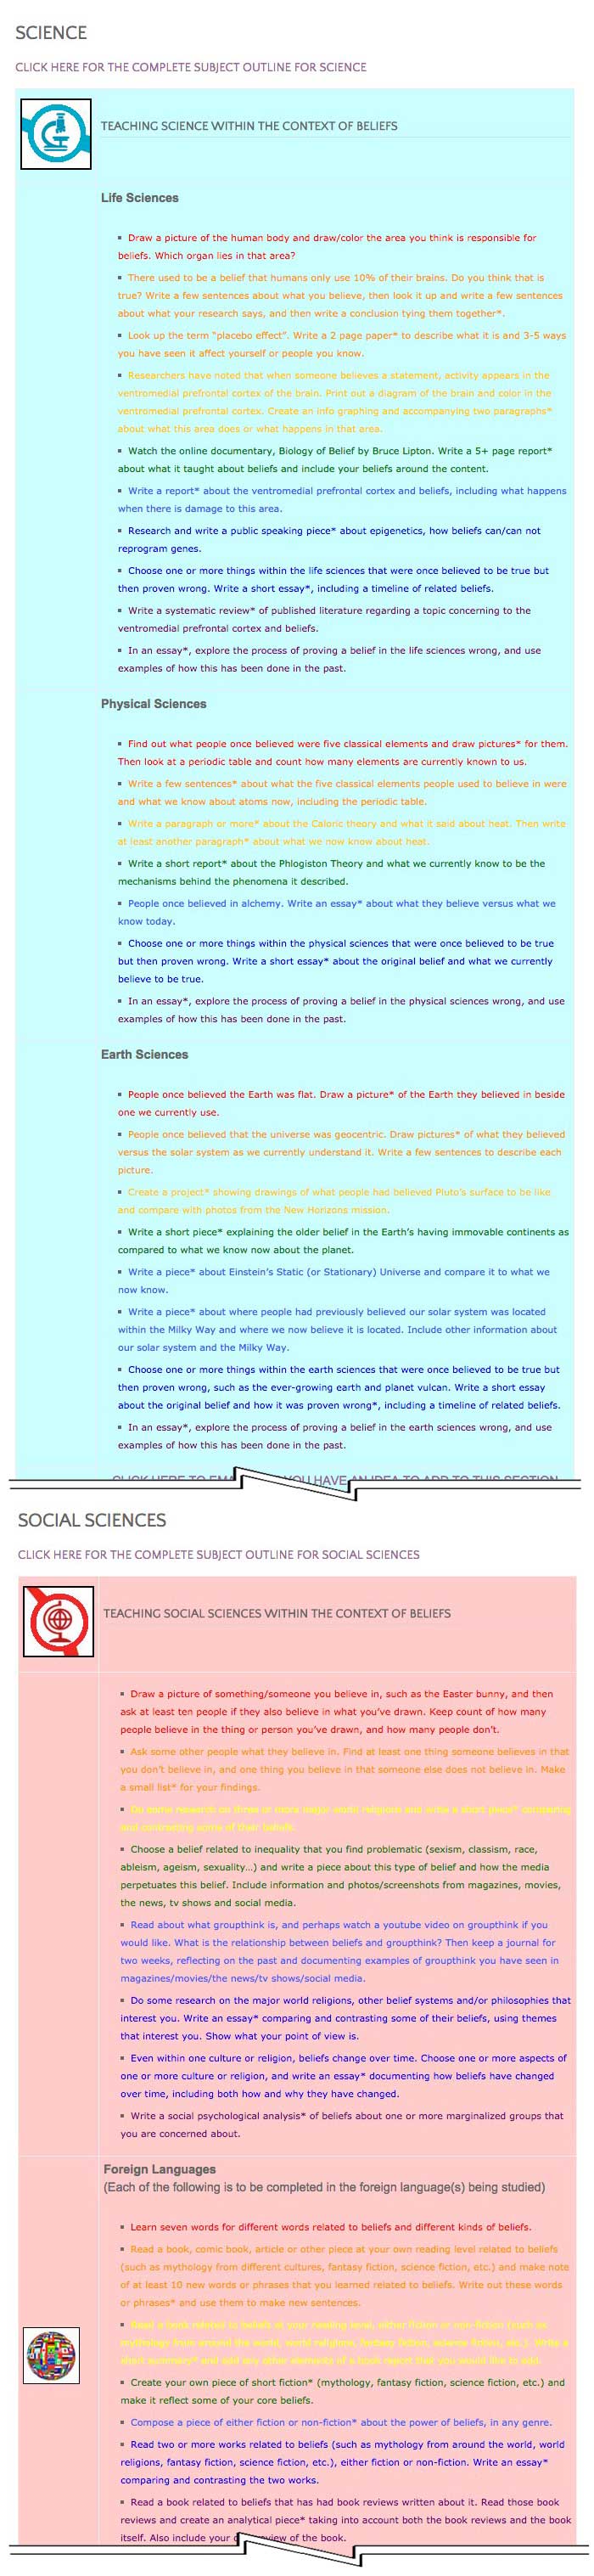 This last week the core team transferred the third 25% of the written content for the Beliefs Lesson Plan to the website, as you see here. This lesson plan purposed to teach all subjects, to all learning levels, in any learning environment, using the central theme of “Beliefs” is now 75% completed on our website.